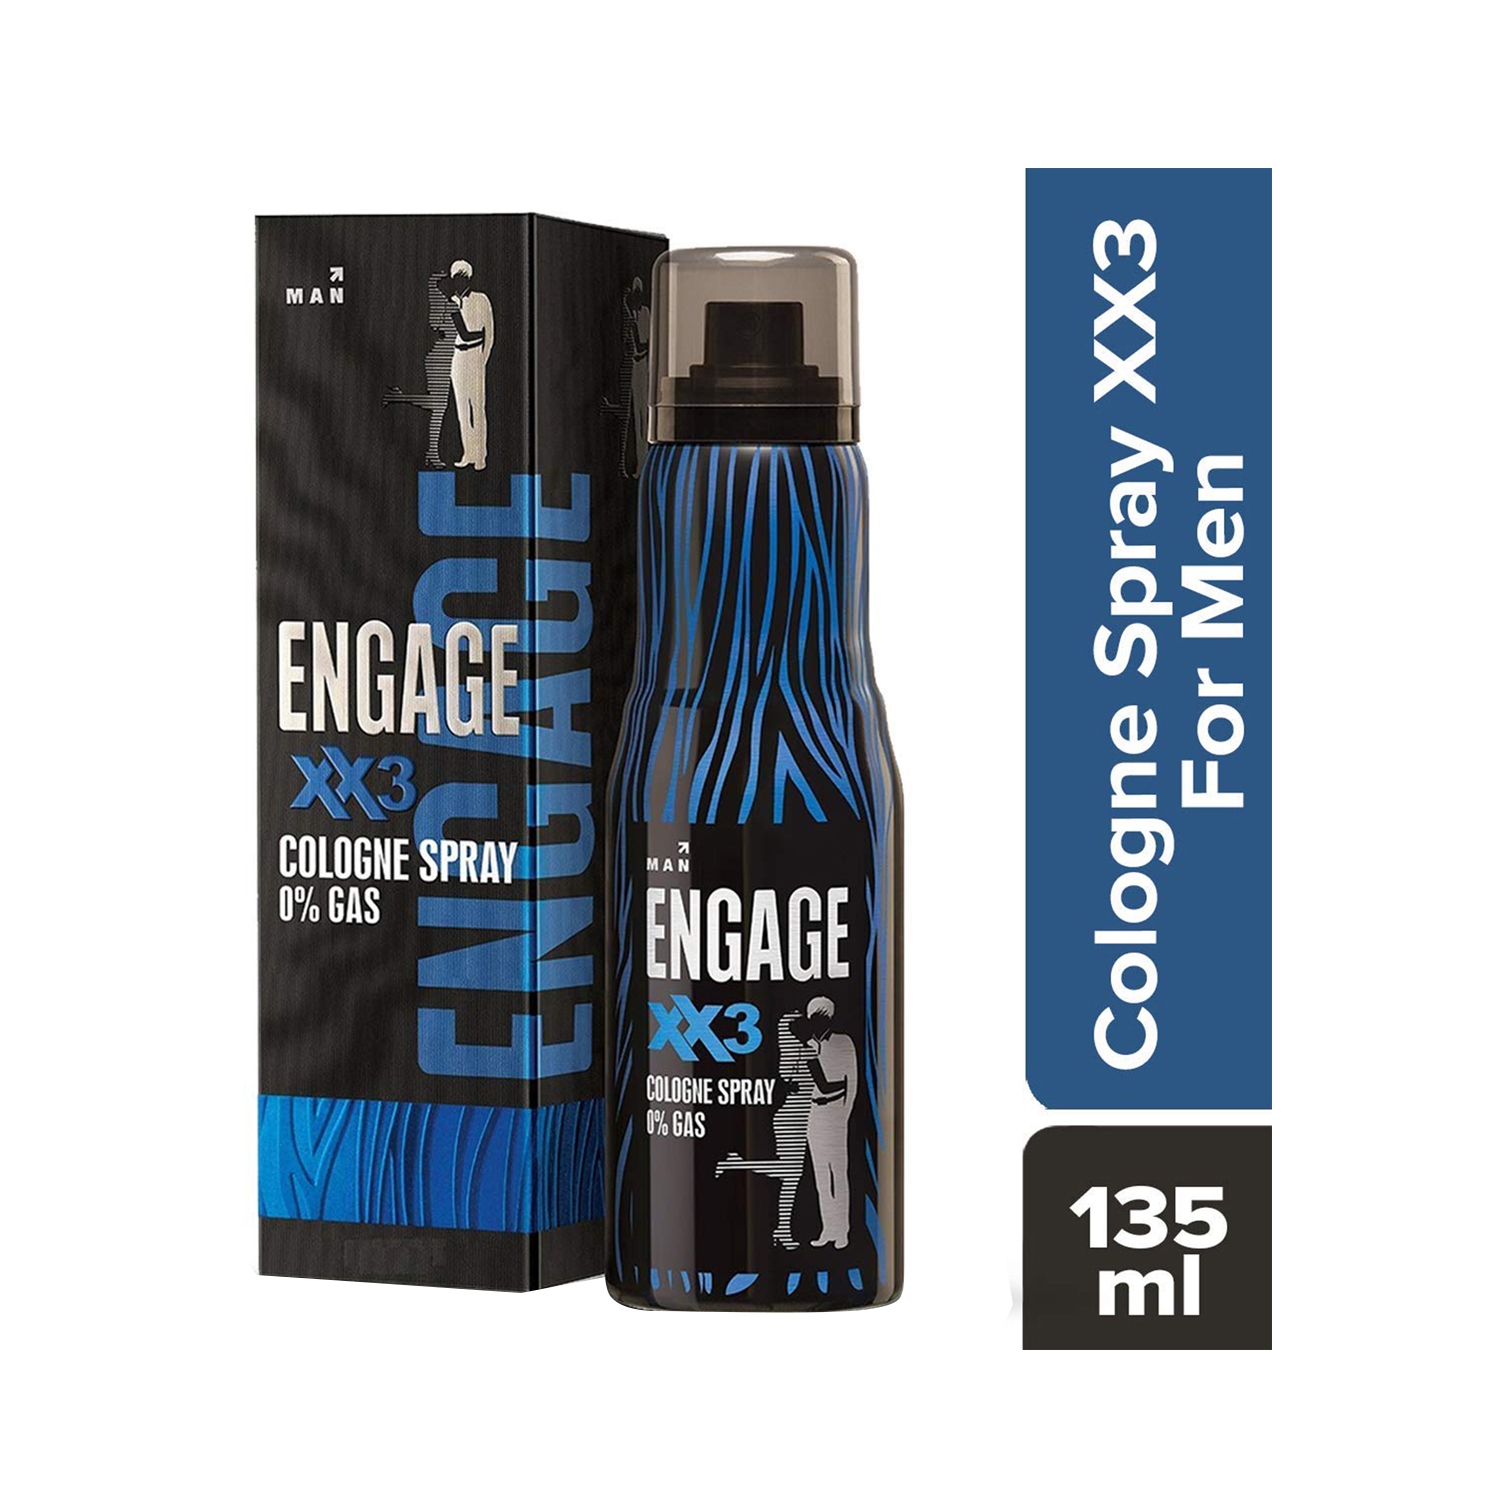 Engage | Engage XX3 Cologne Spray For Man (135ml)